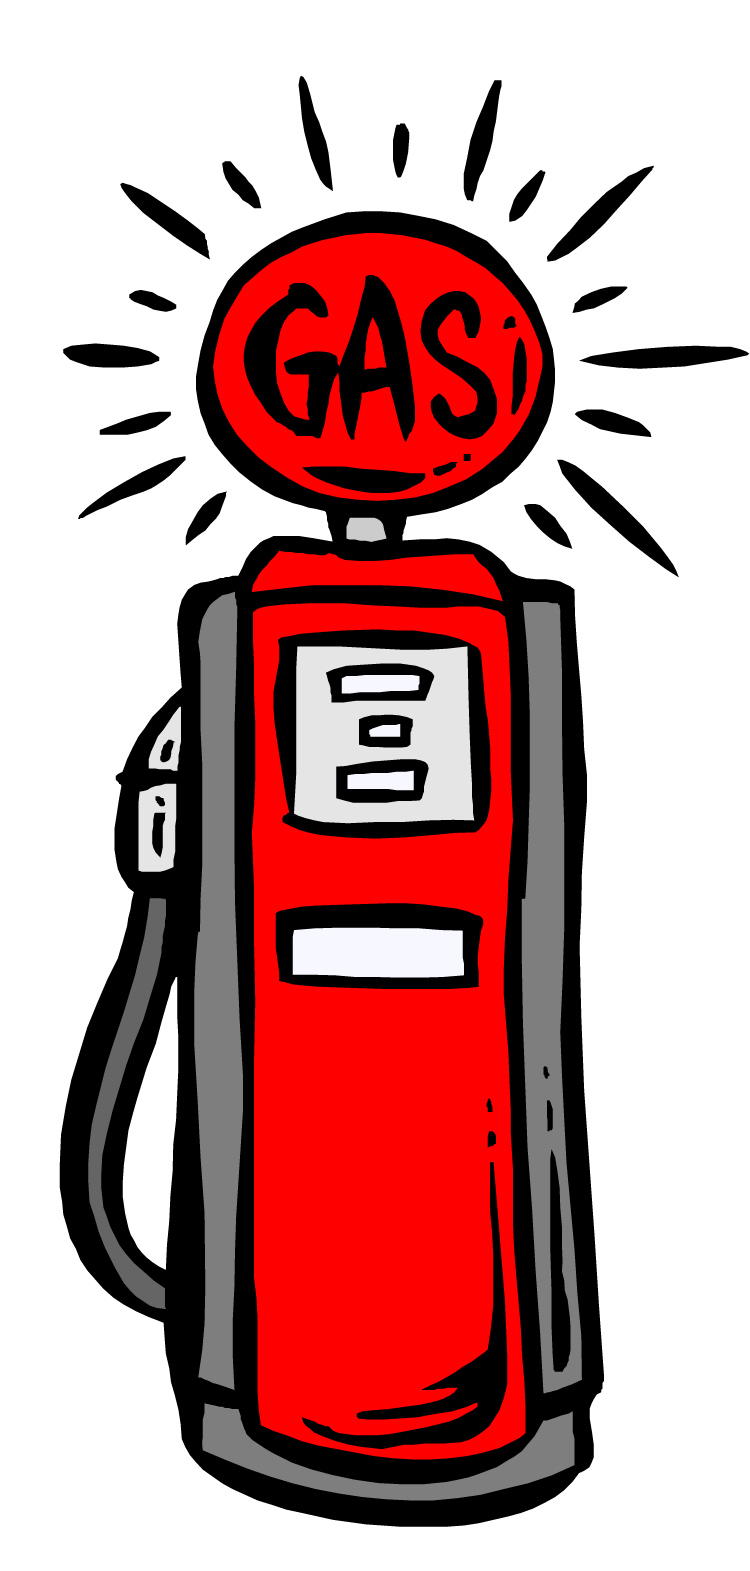 Picture Of A Gas Pump - ClipArt Best